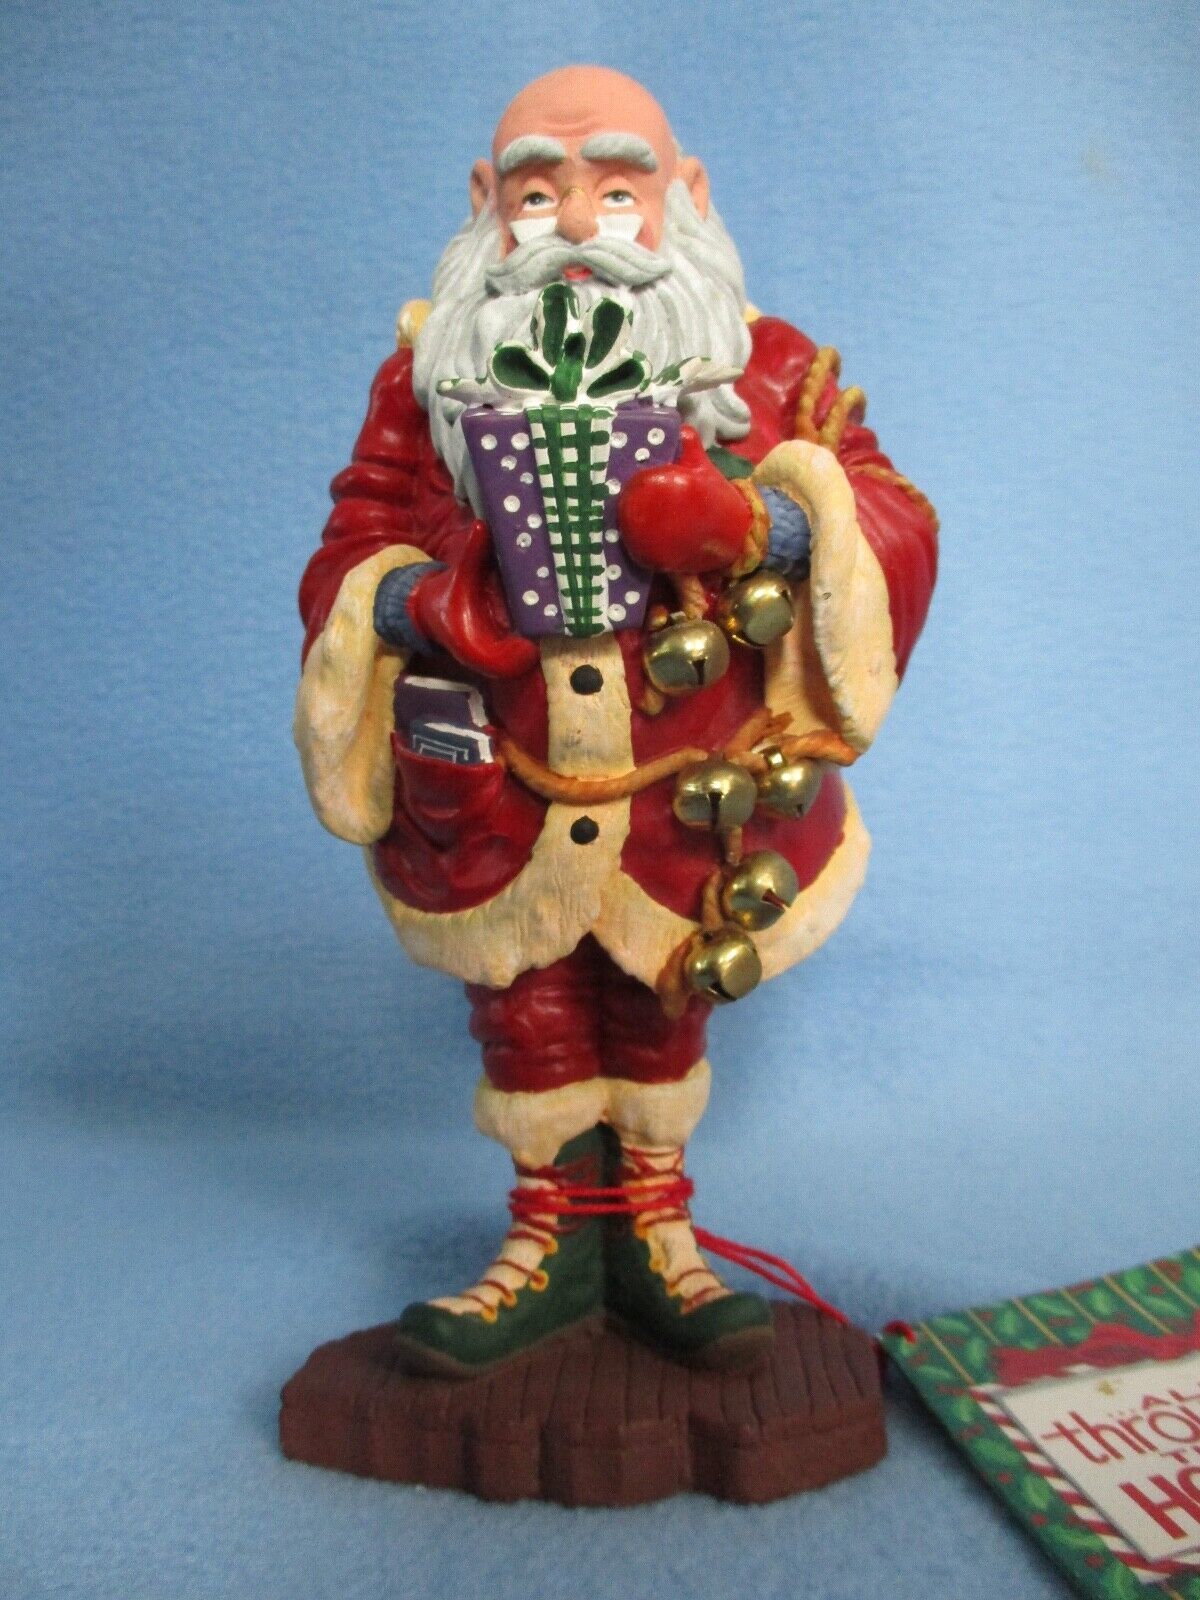 DEPARTMENT 56 ALL THROUGH THE HOUSE CHRISTMAS JOLLY OLD ELF SANTA CLAUS FIGURINE - $6.95